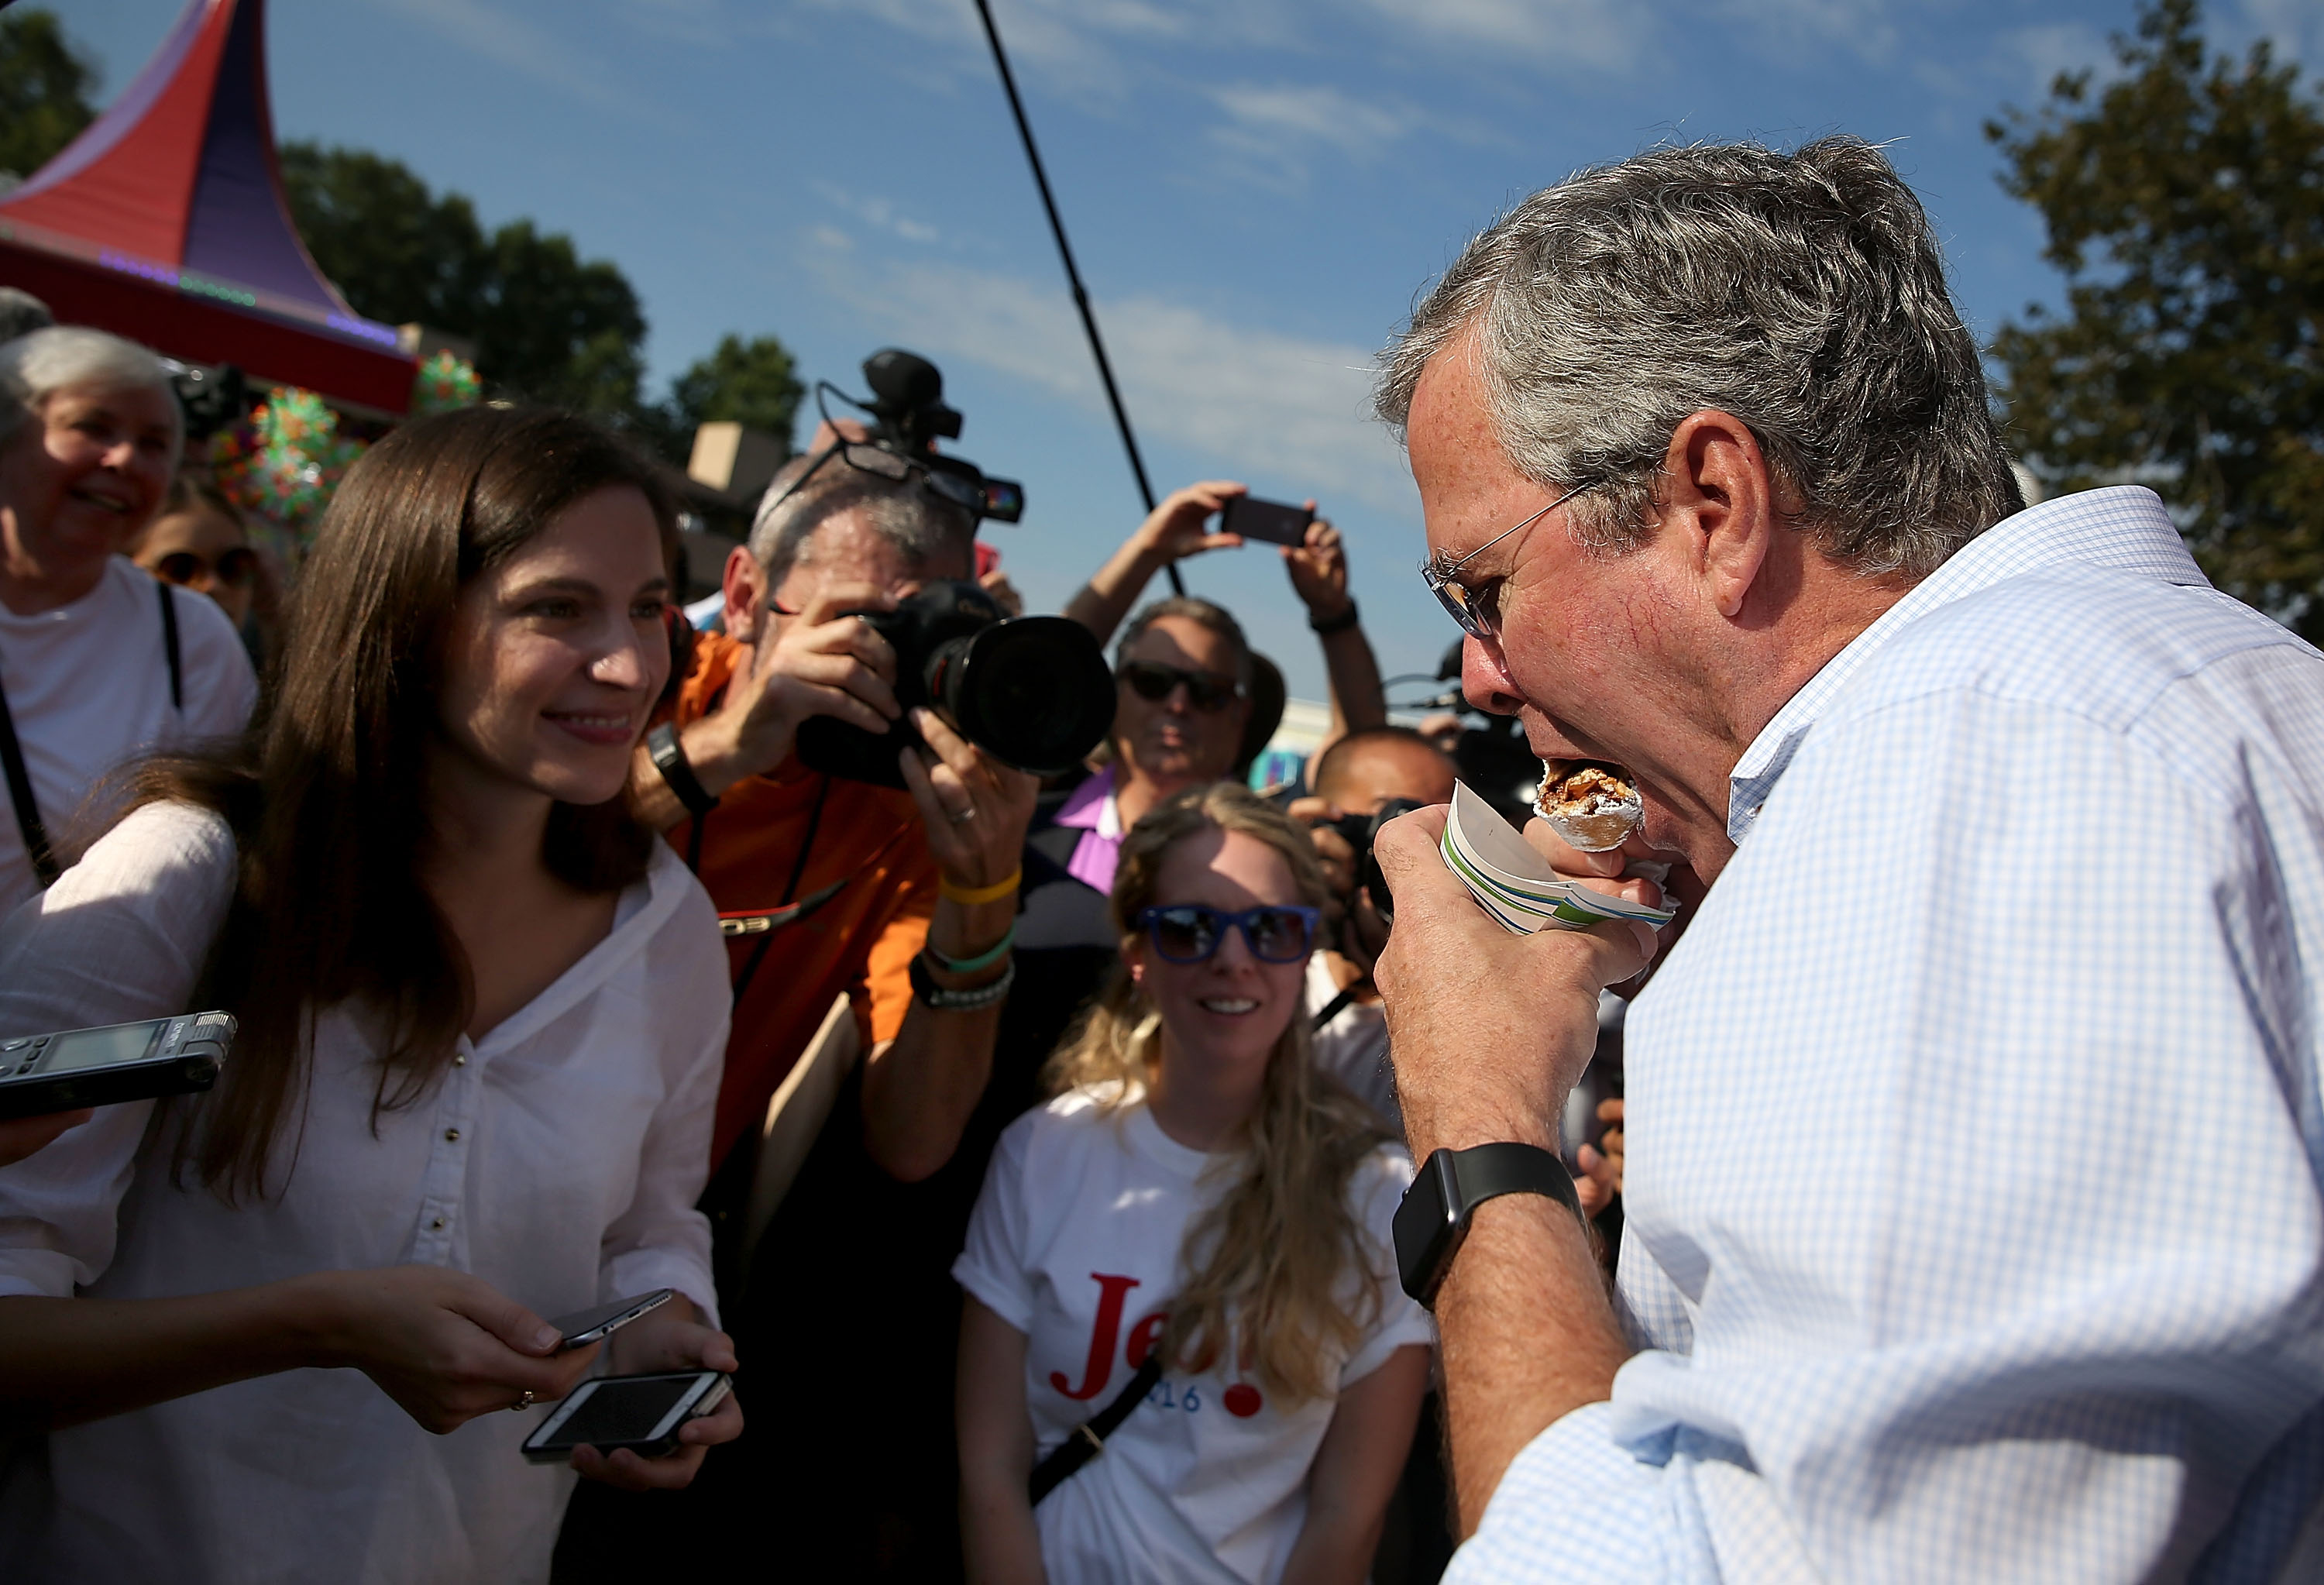 Jeb Bush devouring a fried snickers bar at the Iowa State Fair.